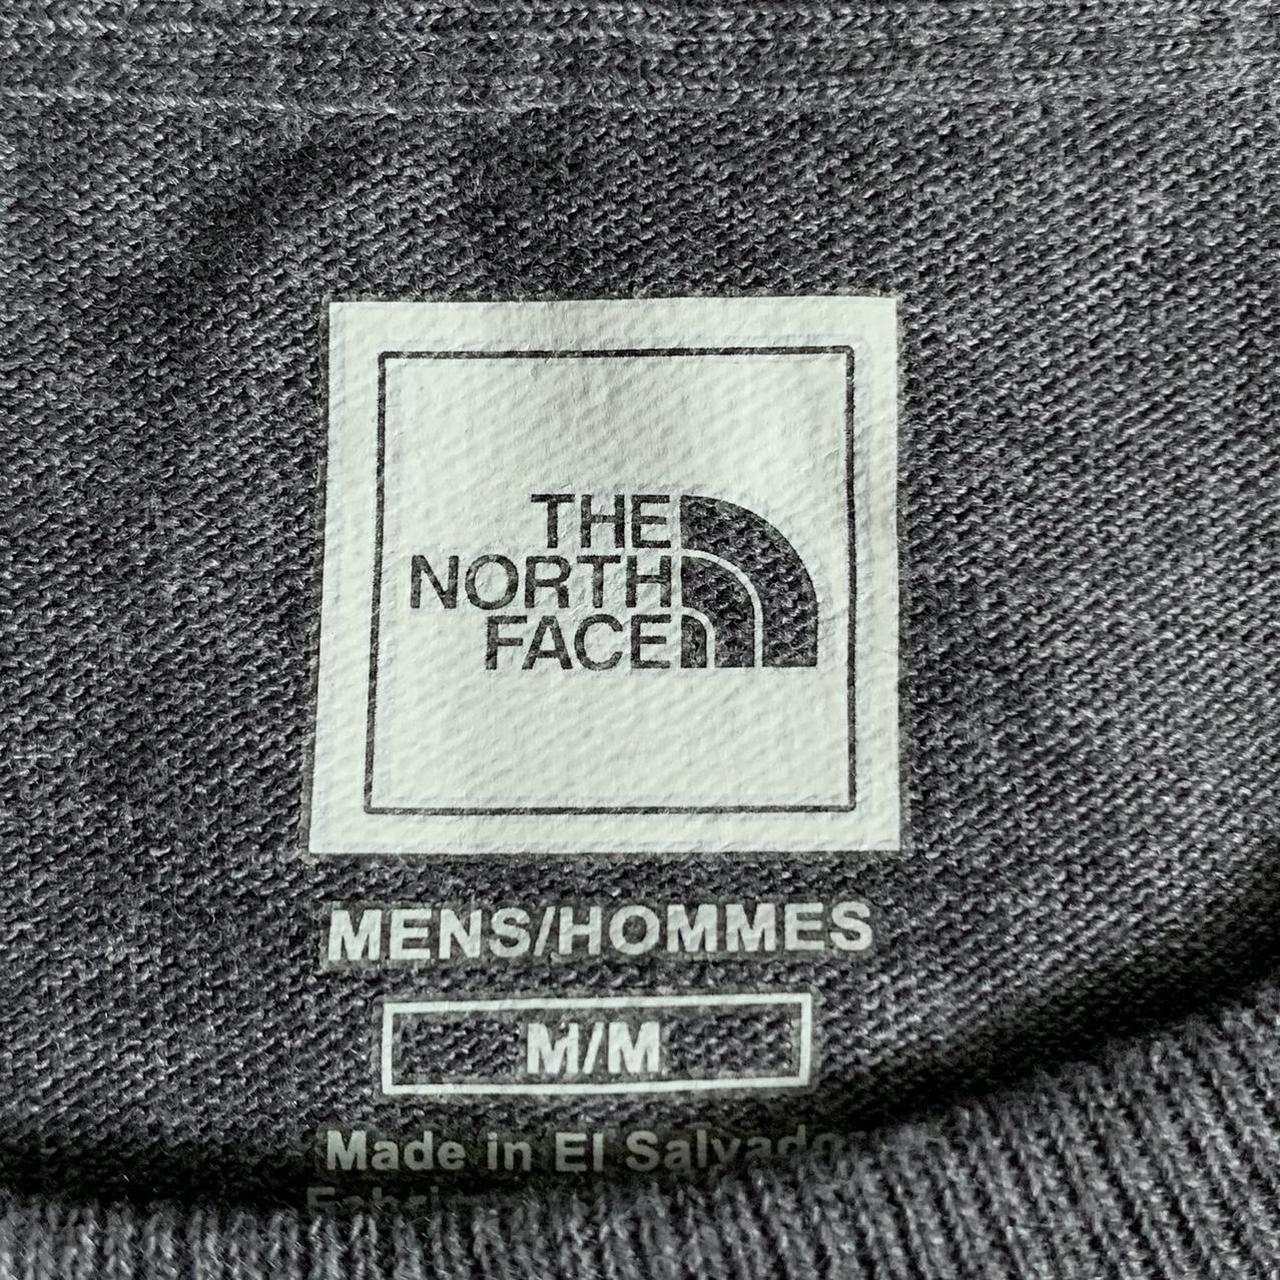 The North Face Men's Grey and Green T-shirt | Depop